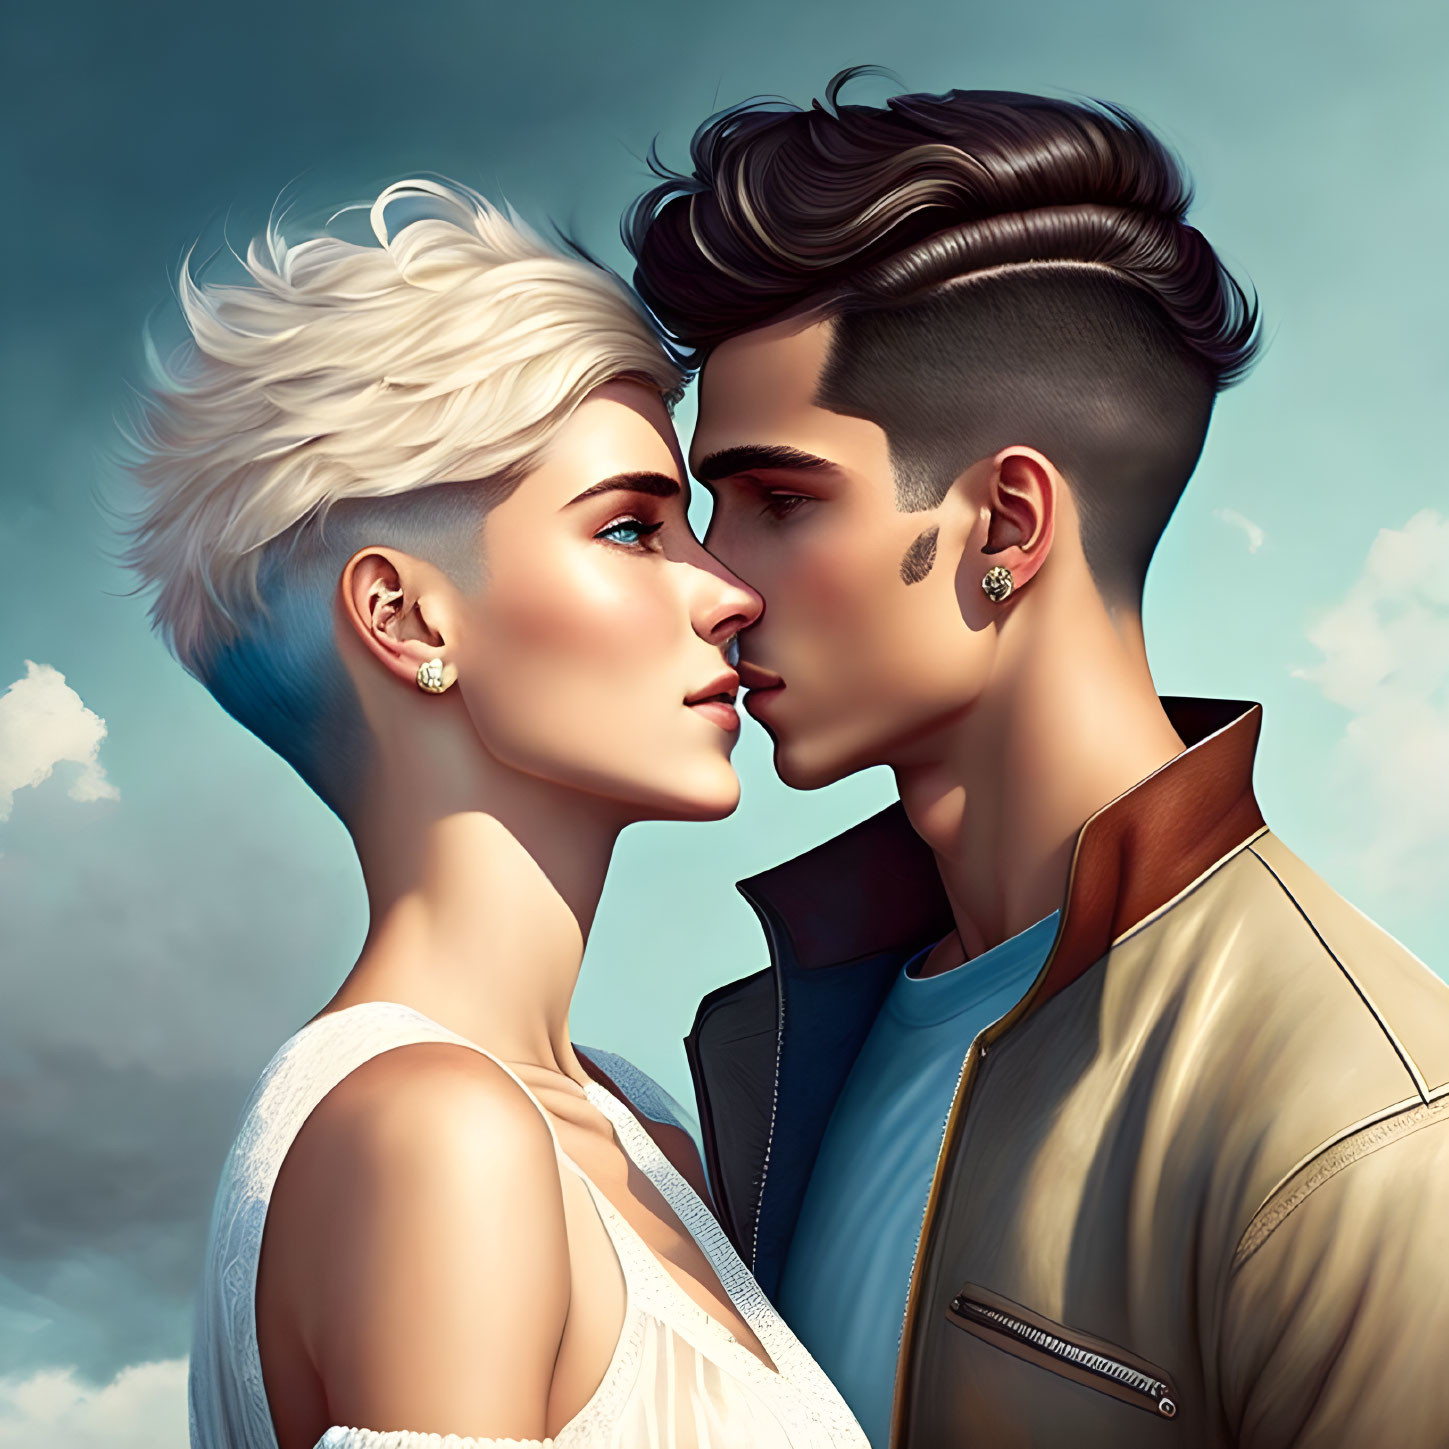 Digital illustration: Man and woman kissing in stylish attire under cloudy sky